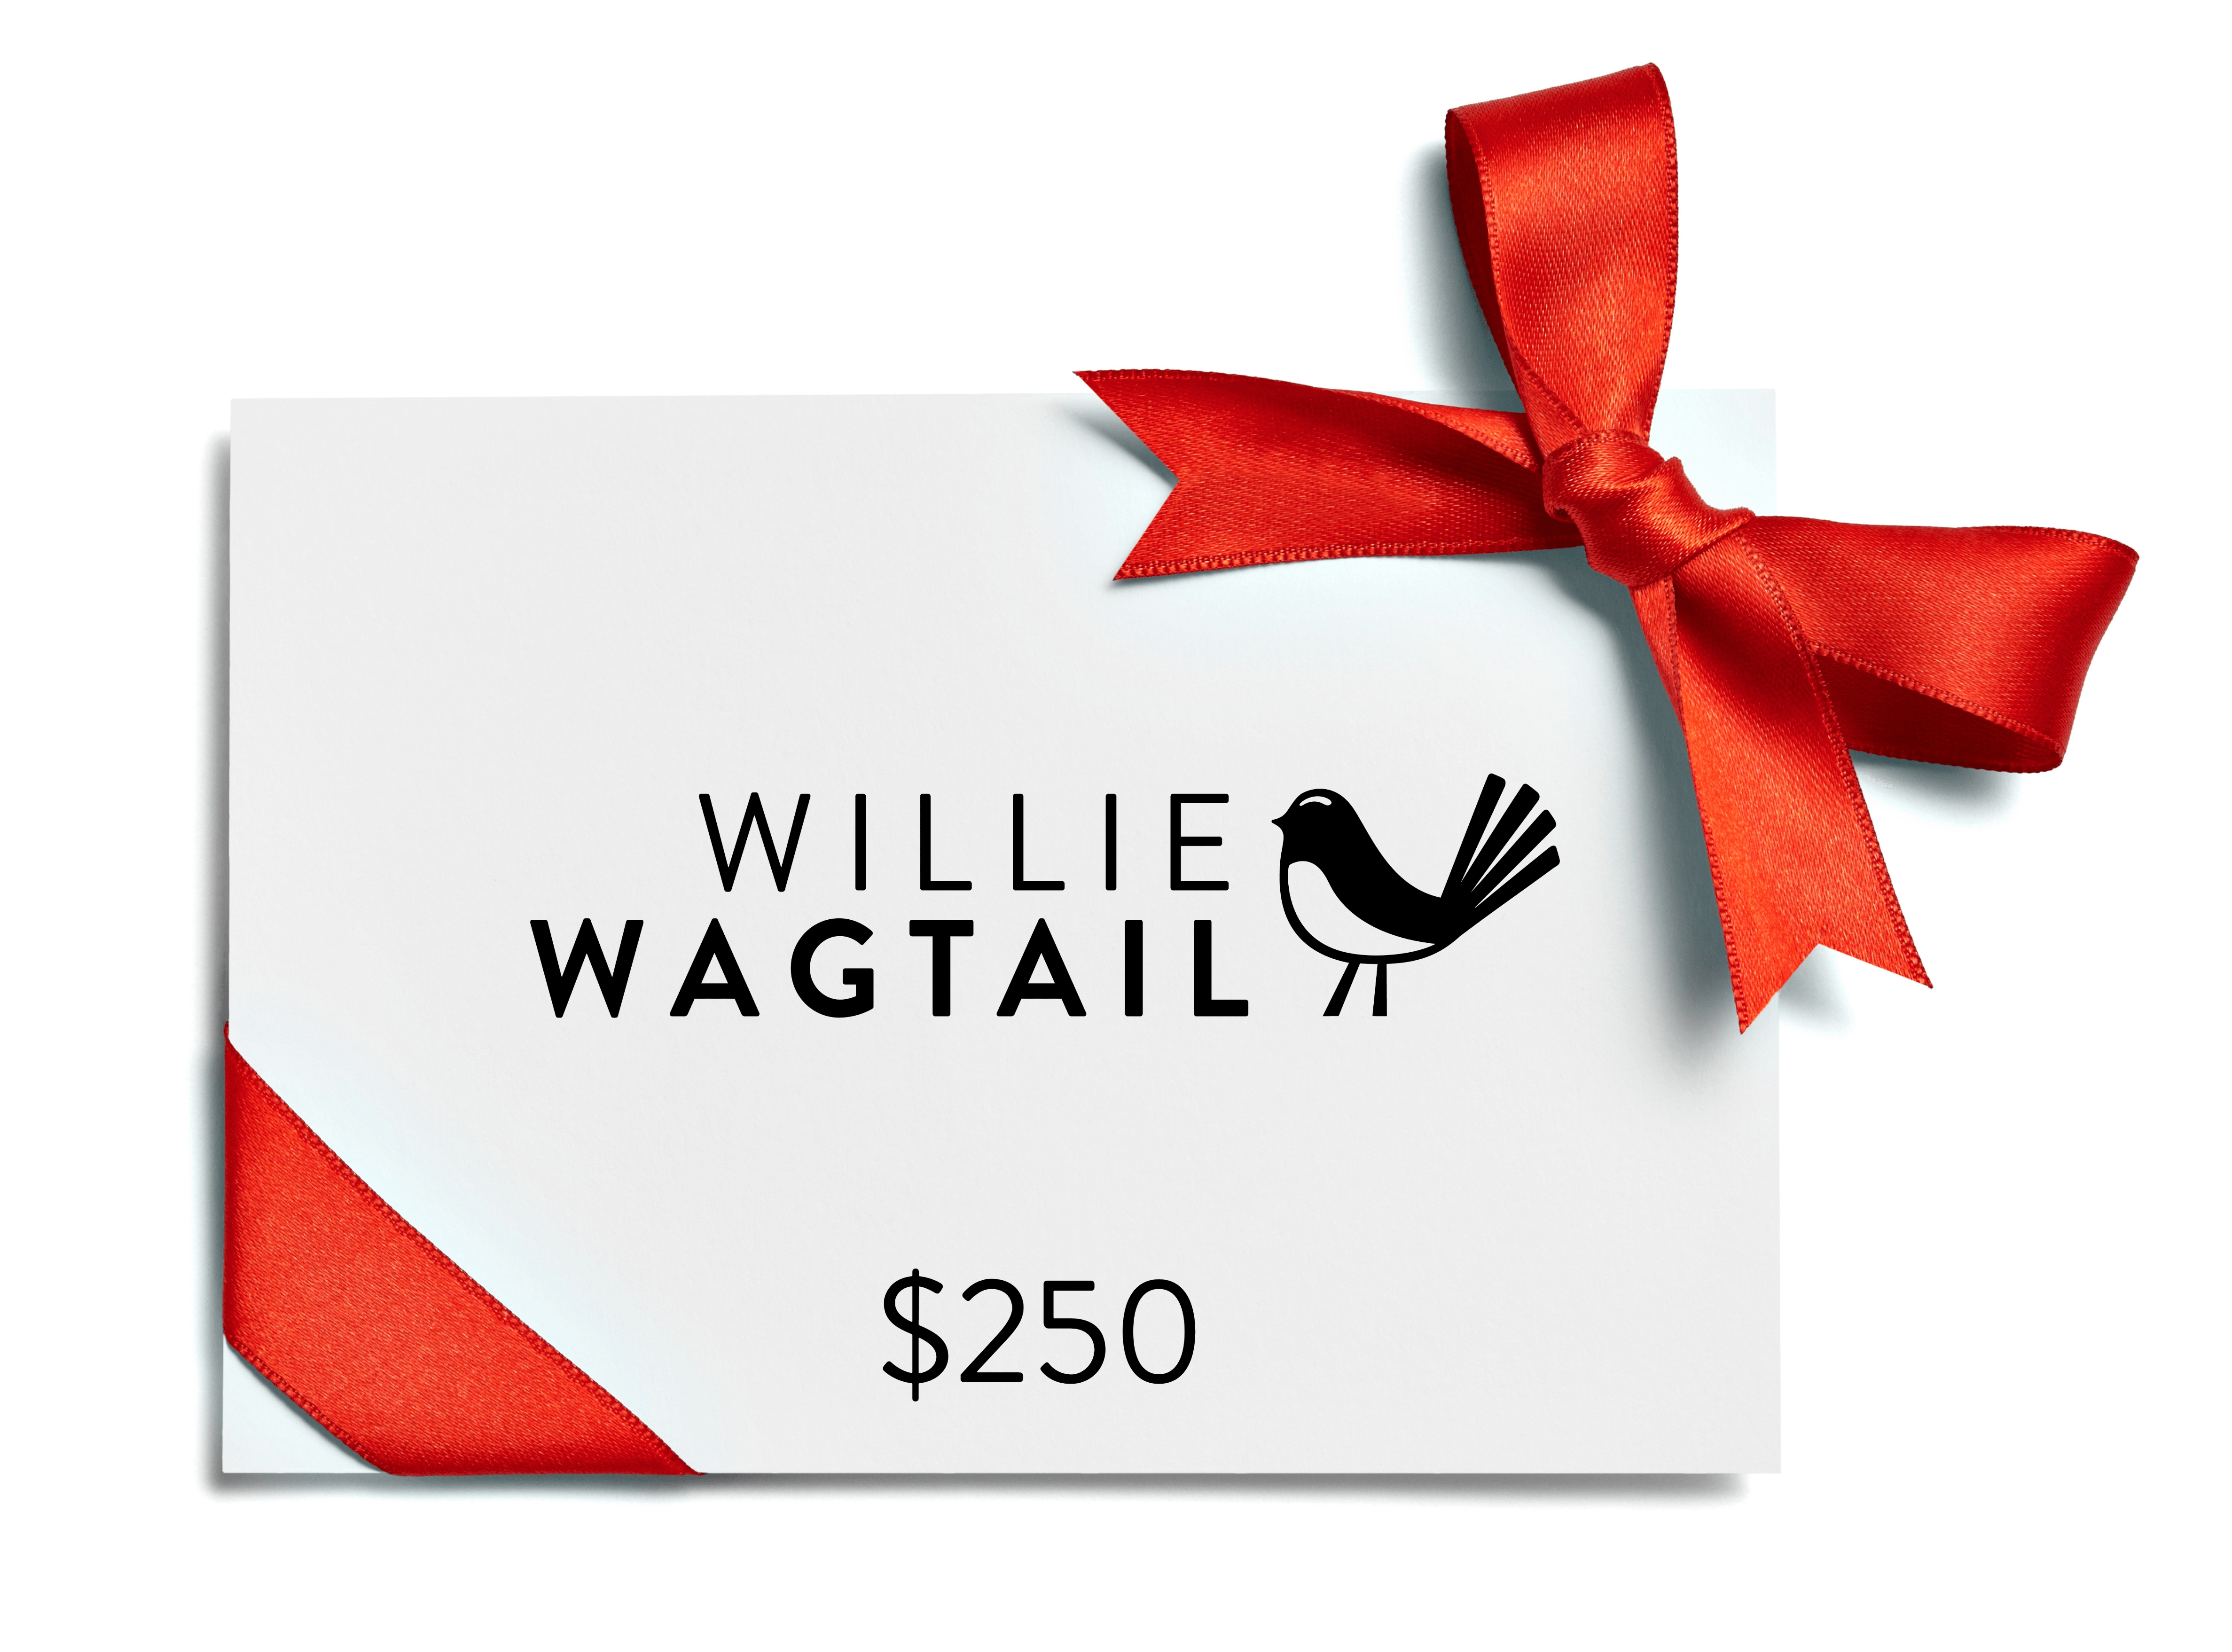 Willie Wagtail Digital Gift Card - Willie Wagtail